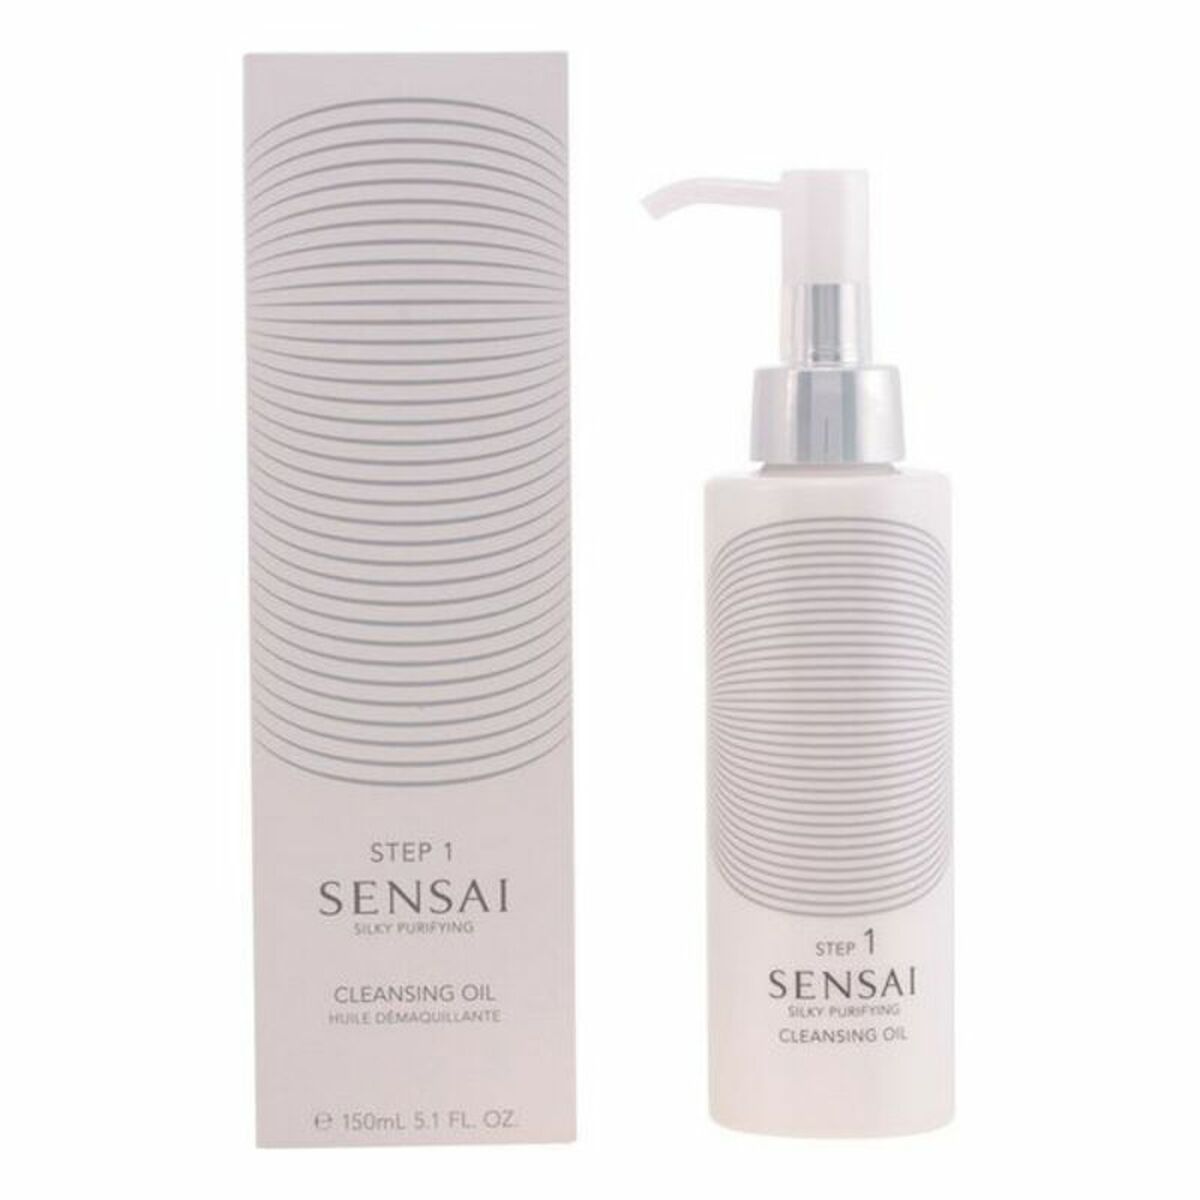 Make-up Remover Oil Purifying Cleansing Sensai (150 ml)